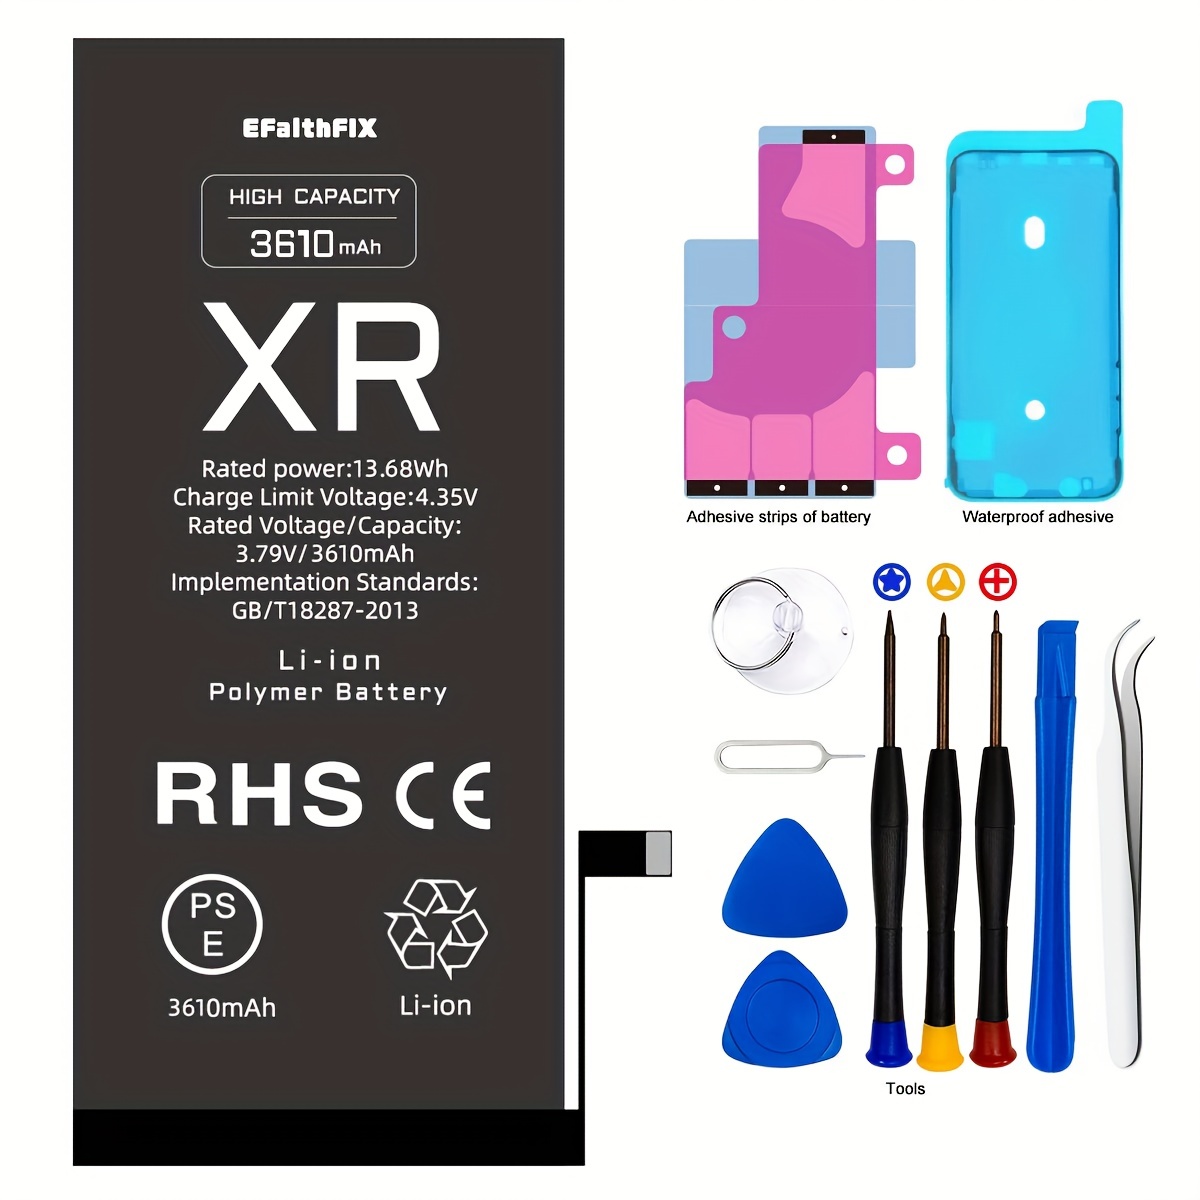 iPhone X Battery iPhone XR Battery iPhone XS/iPhone XS Max Battery  Replacement